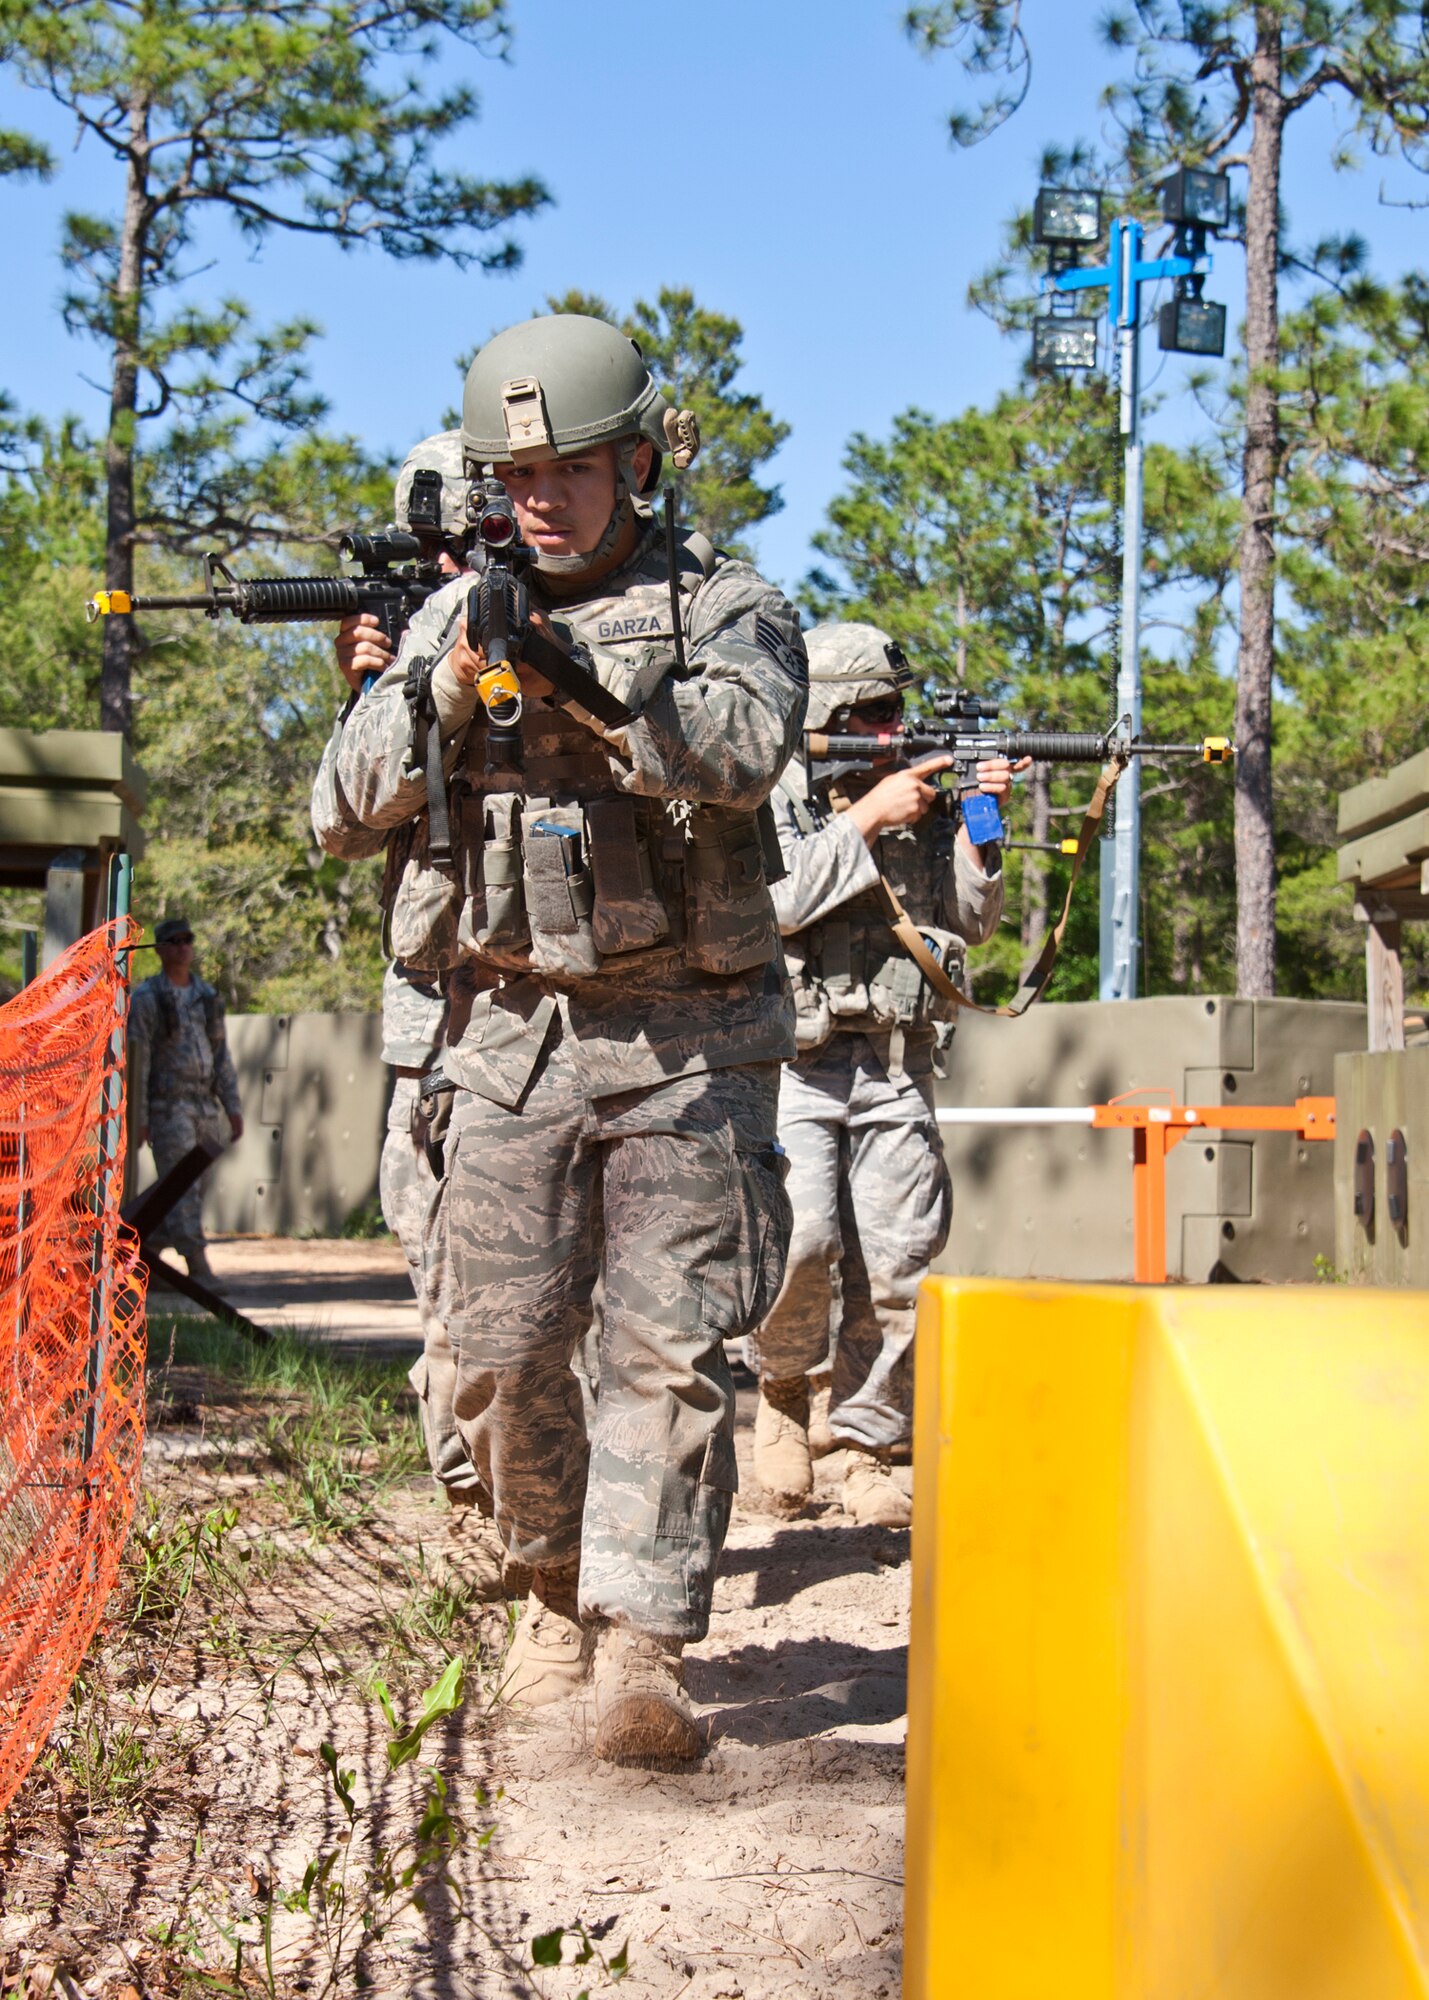 Staff Sgt. Eric Garza, 10th Security Forces Squadron, leads the quick response force toward the site of a vehicle-borne improvised explosive device detonation during an exercise April 28 at Eglin Air Force Base, Fla.   This was part of Air Force Materiel Command’s "Brave Defender" training, which is administered by the 96th Ground Combat Training Squadron.  ECP guards experienced random vehicle inspections, media visits and VBIEDs during posted shifts.   GCTS instructors push 10 training classes a year, which consists of IED detection and reaction, operating in an urban environment, mission planning, land navigation and casualty care. The three-week training culminates with a three-day field training exercise where the Airmen apply what they learned in combat scenarios.  More than 140 Airmen from more than six major commands attended this training.  (U.S. Air Force photo/Samuel King Jr.)